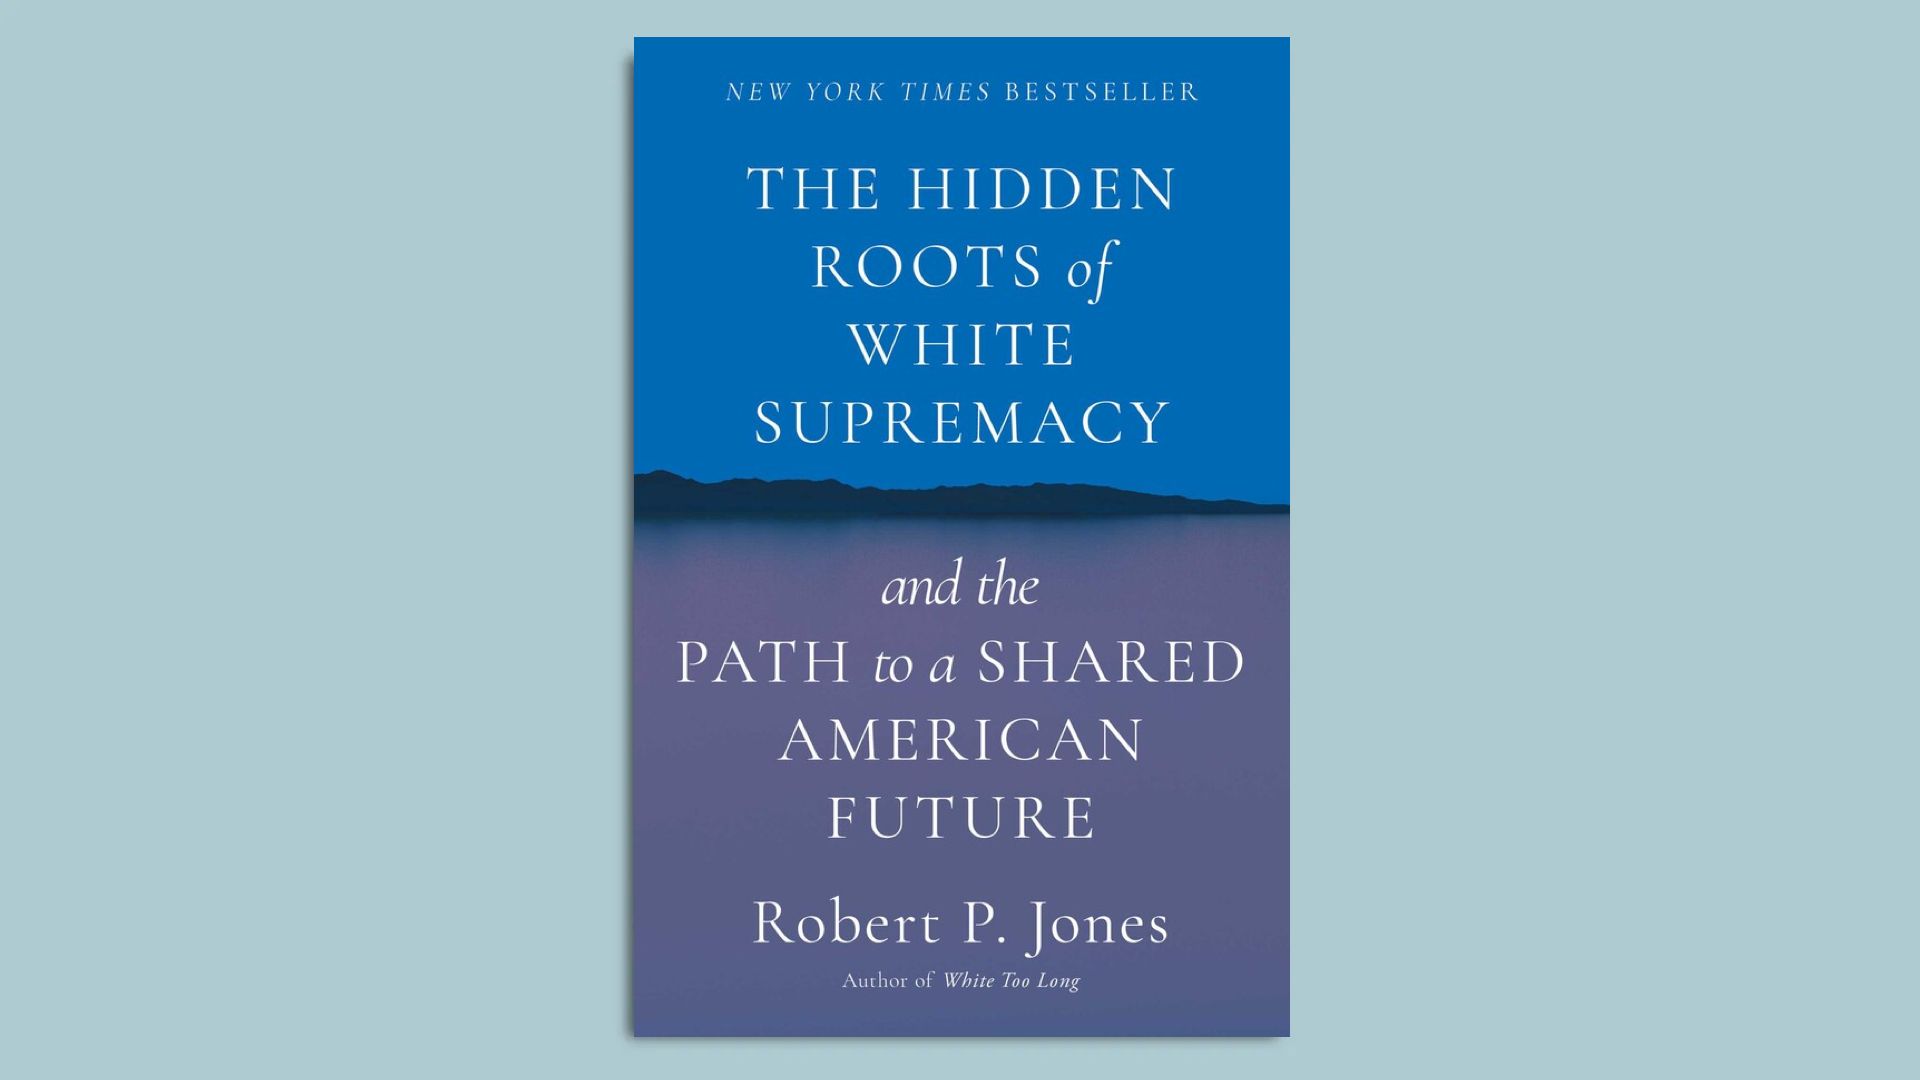 The cover the book, "The Hidden Roots of White Supremacy and the Path to a Shared American Future."